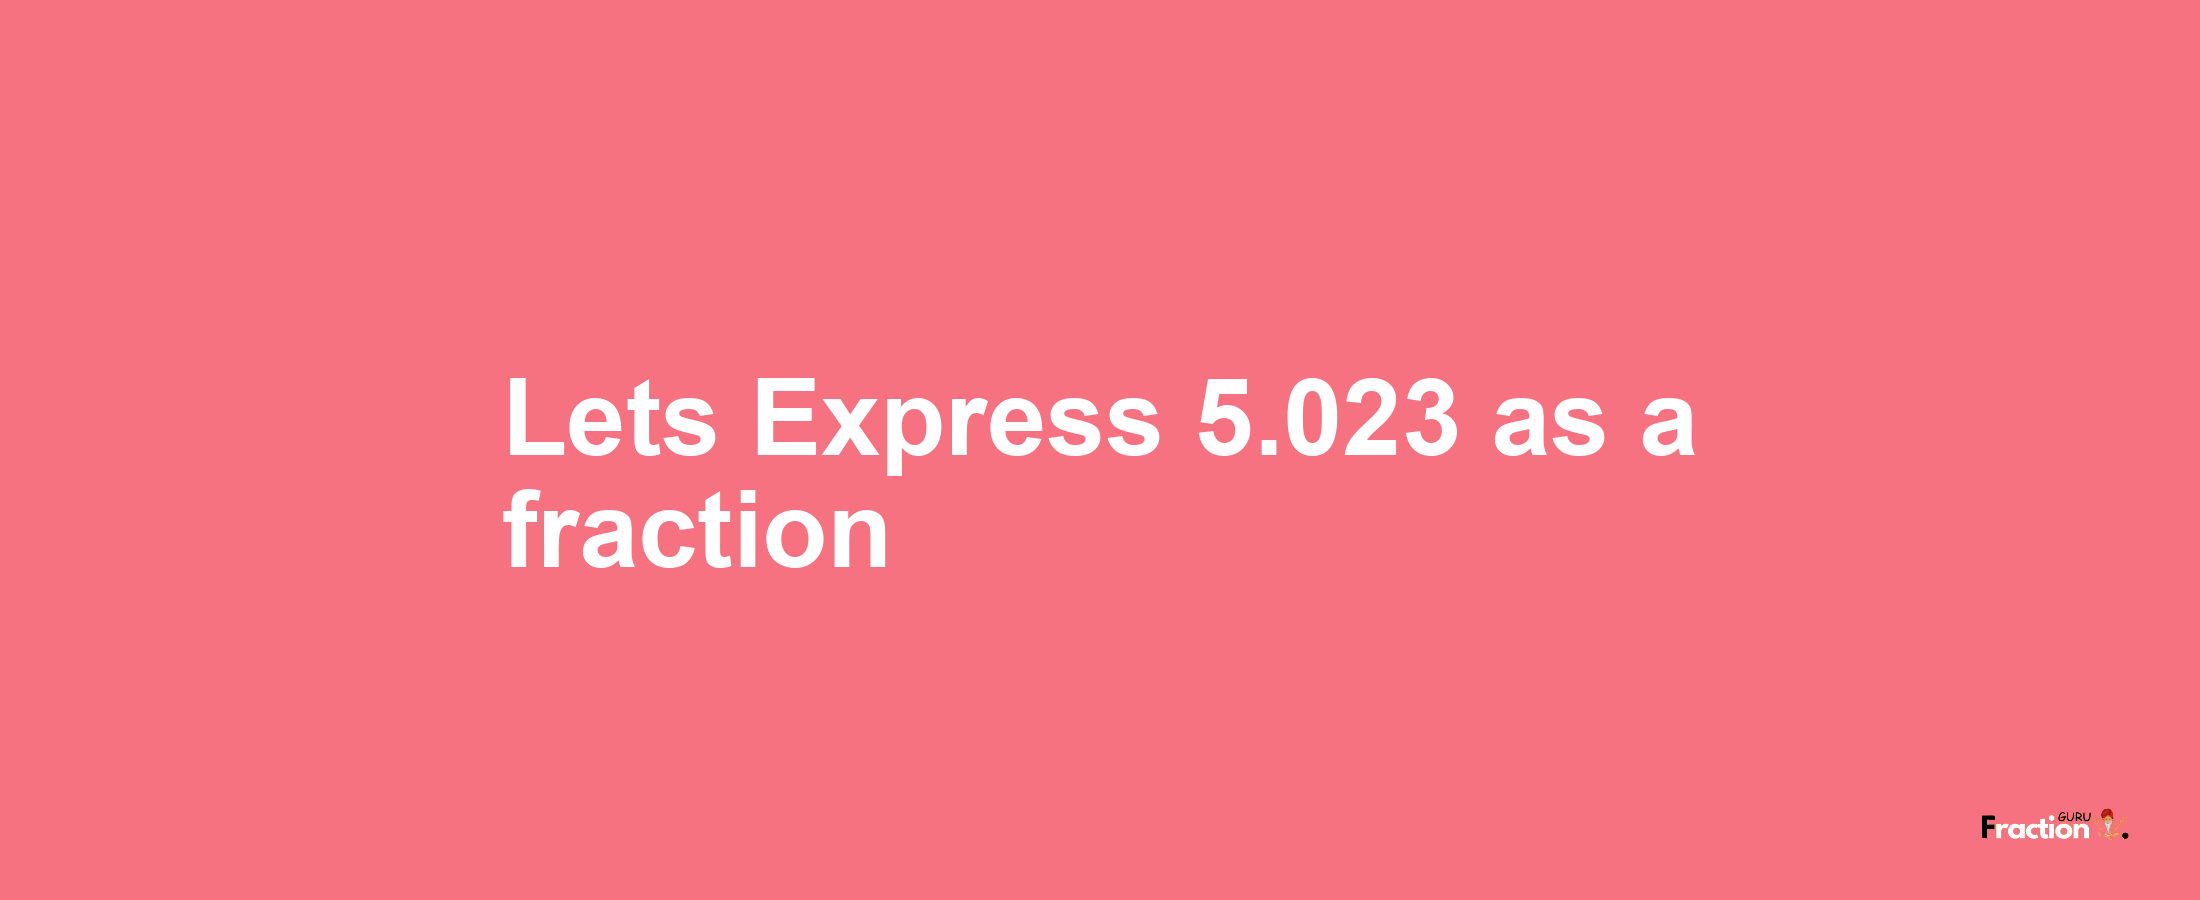 Lets Express 5.023 as afraction